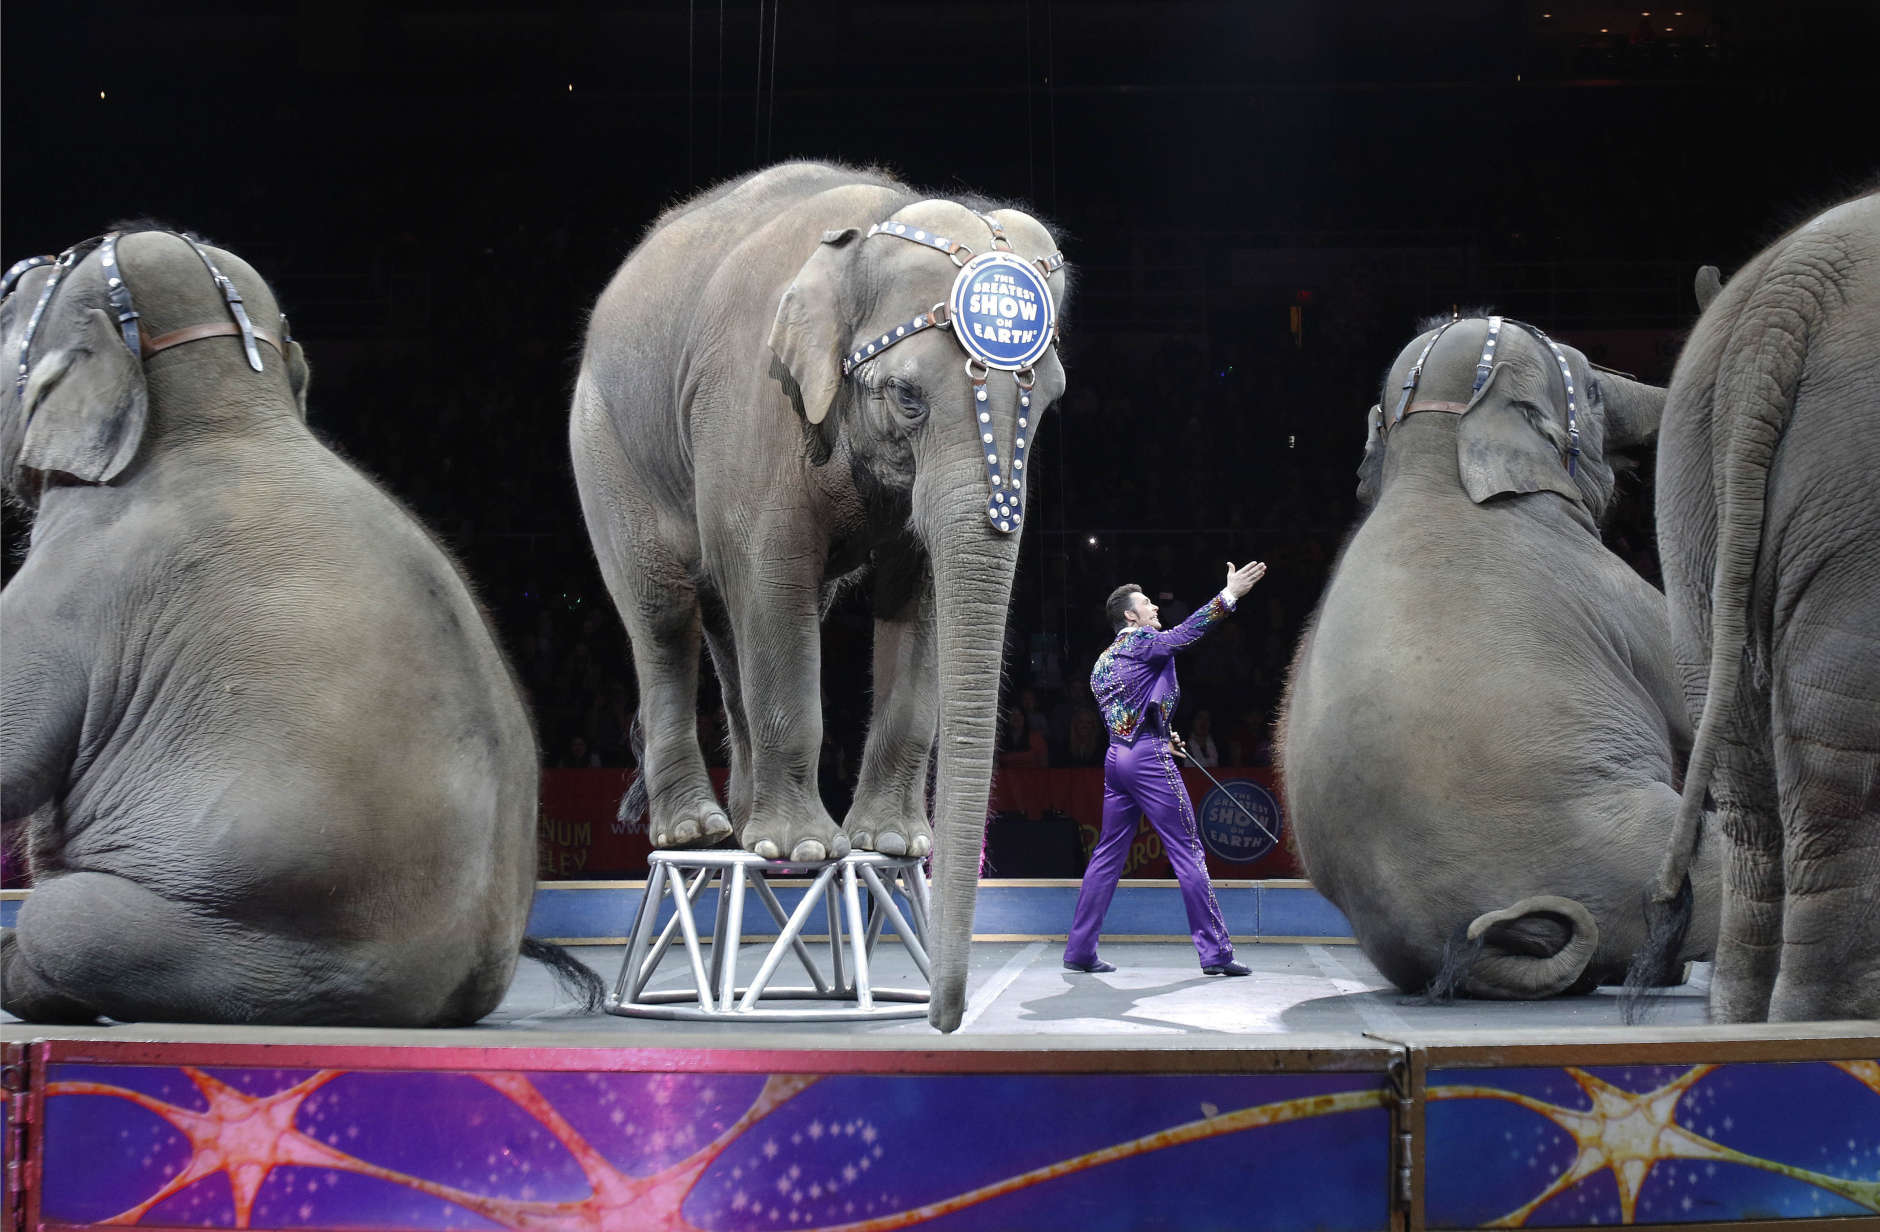 Asian elephants perform for the final time in the Ringling Bros. and Barnum &amp; Bailey Circus Sunday, May 1, 2016, in Providence, R.I. The circus closes its own chapter on a controversial practice that has entertained audiences since circuses began in America two centuries ago. The animals will live at the Ringling Bros. 200-acre Center for Elephant Conservation in Florida. (AP Photo/Bill Sikes)